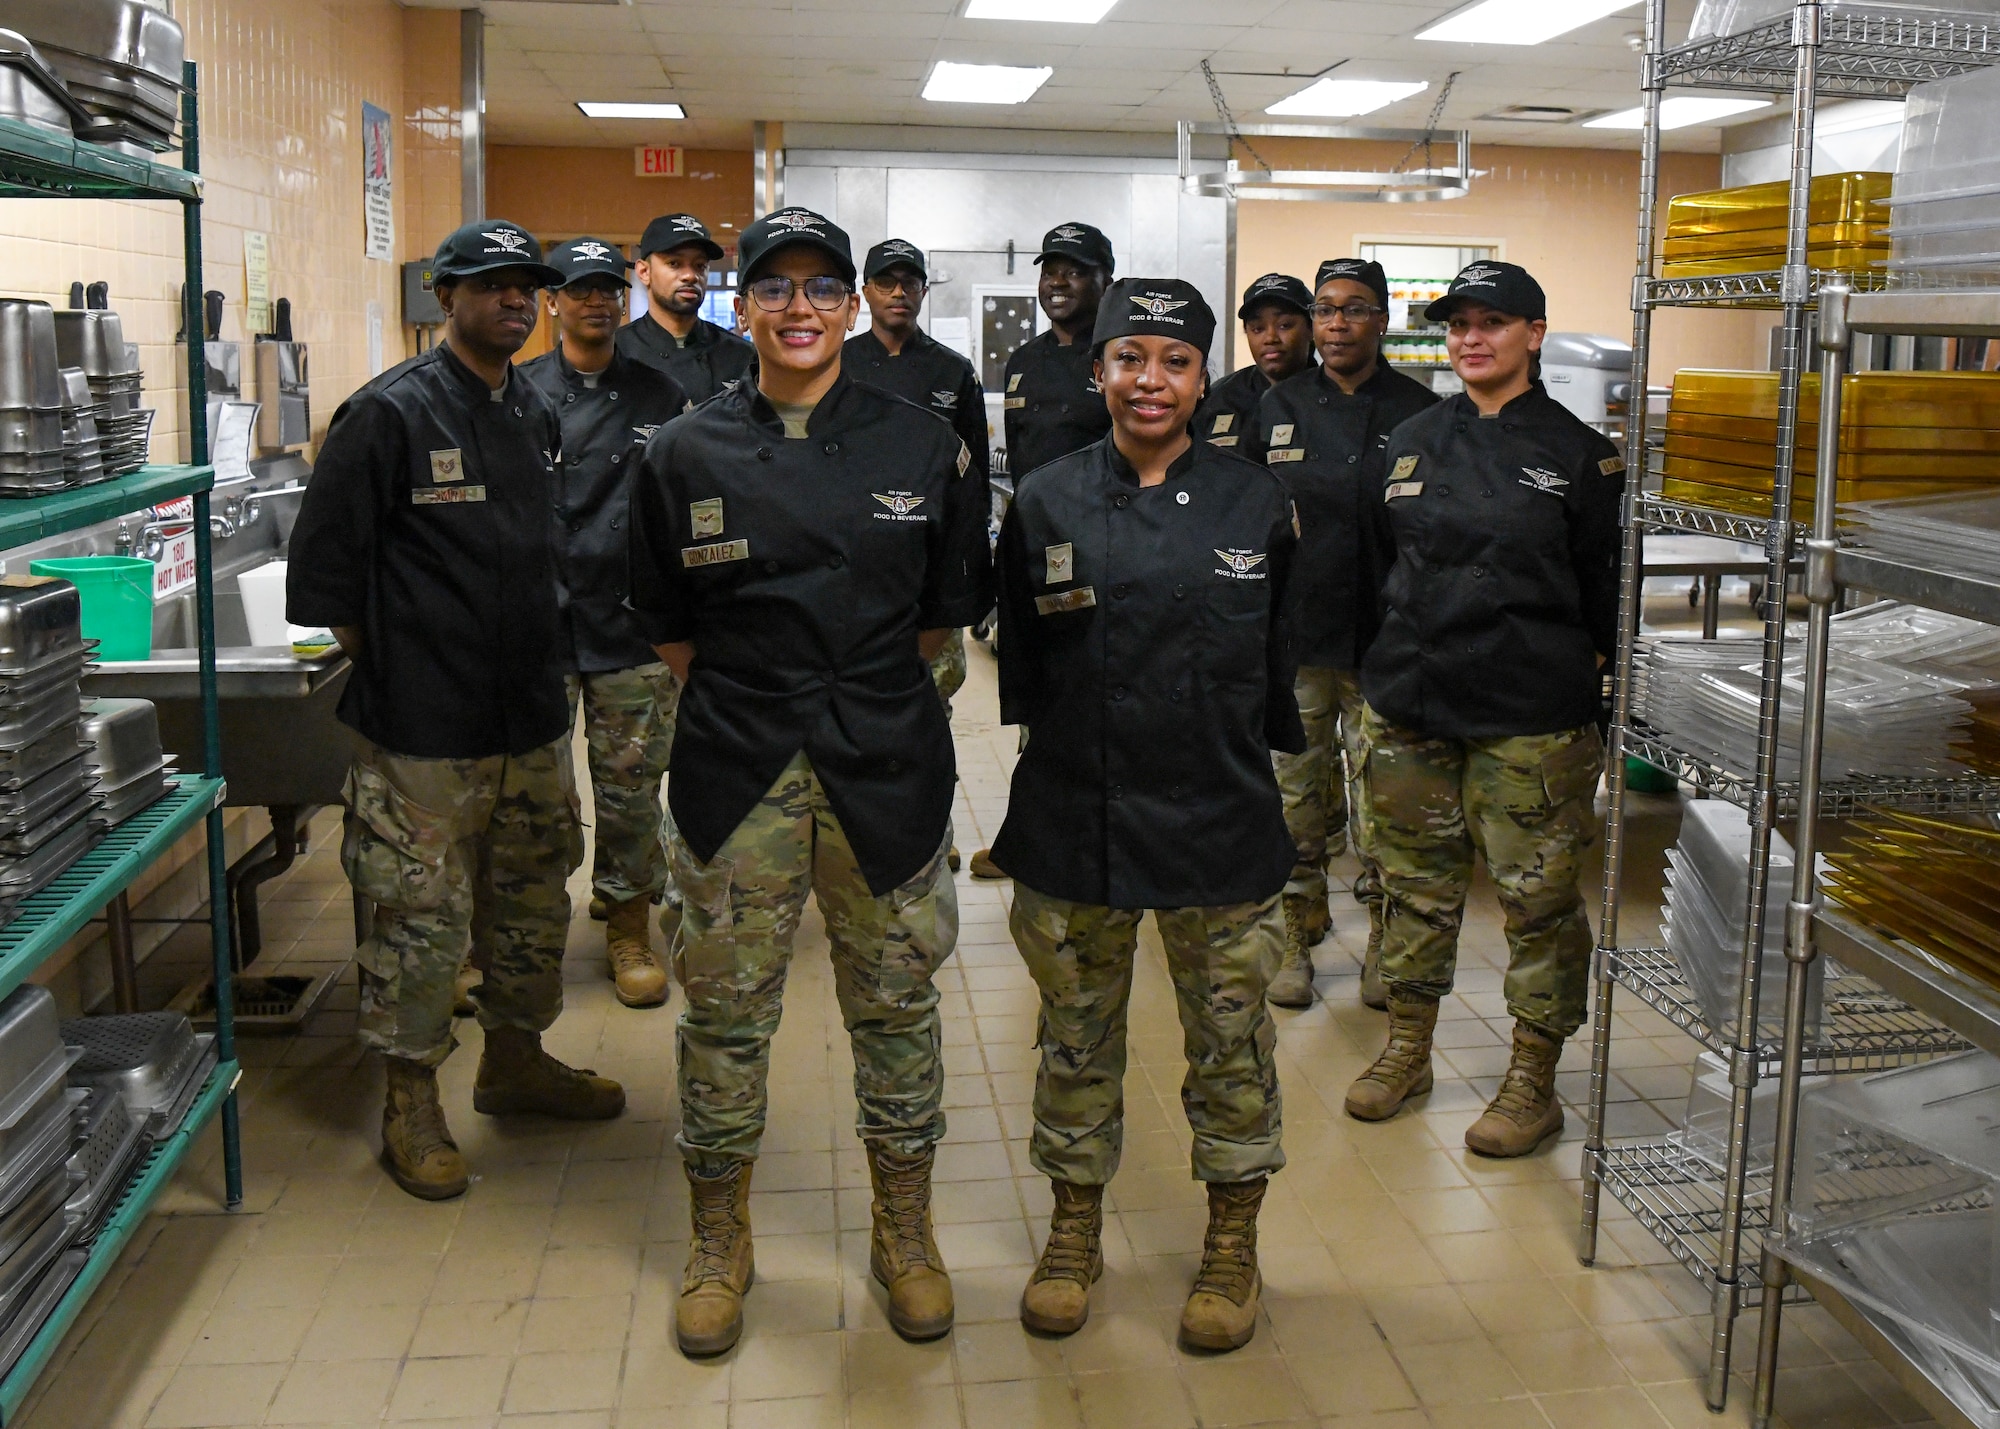 U.S. Air Force services Airmen of the 106th Rescue Wing, showcase their new chef's black uniforms at Francis S. Gabreski Air National Guard Base, Westhampton Beach, New York National Guard, Dec. 3, 2023. The 106th services Airmen debuted their new uniforms during the November drill to enhance functionality and professional appearance. (U.S. Air National Guard photo by Staff Sgt. Kevin J. Donaldson)